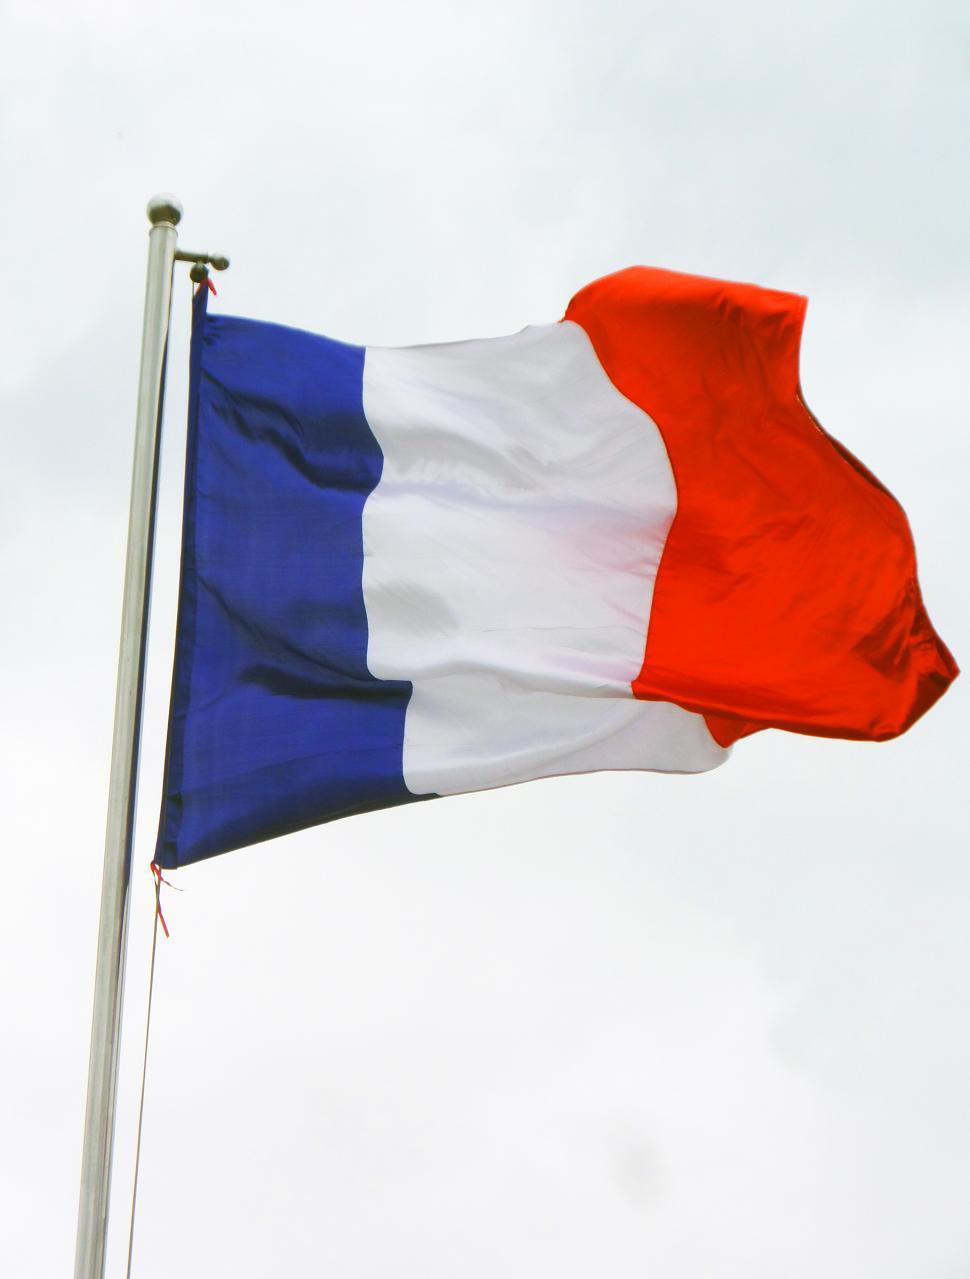 Free Image of The French flag 